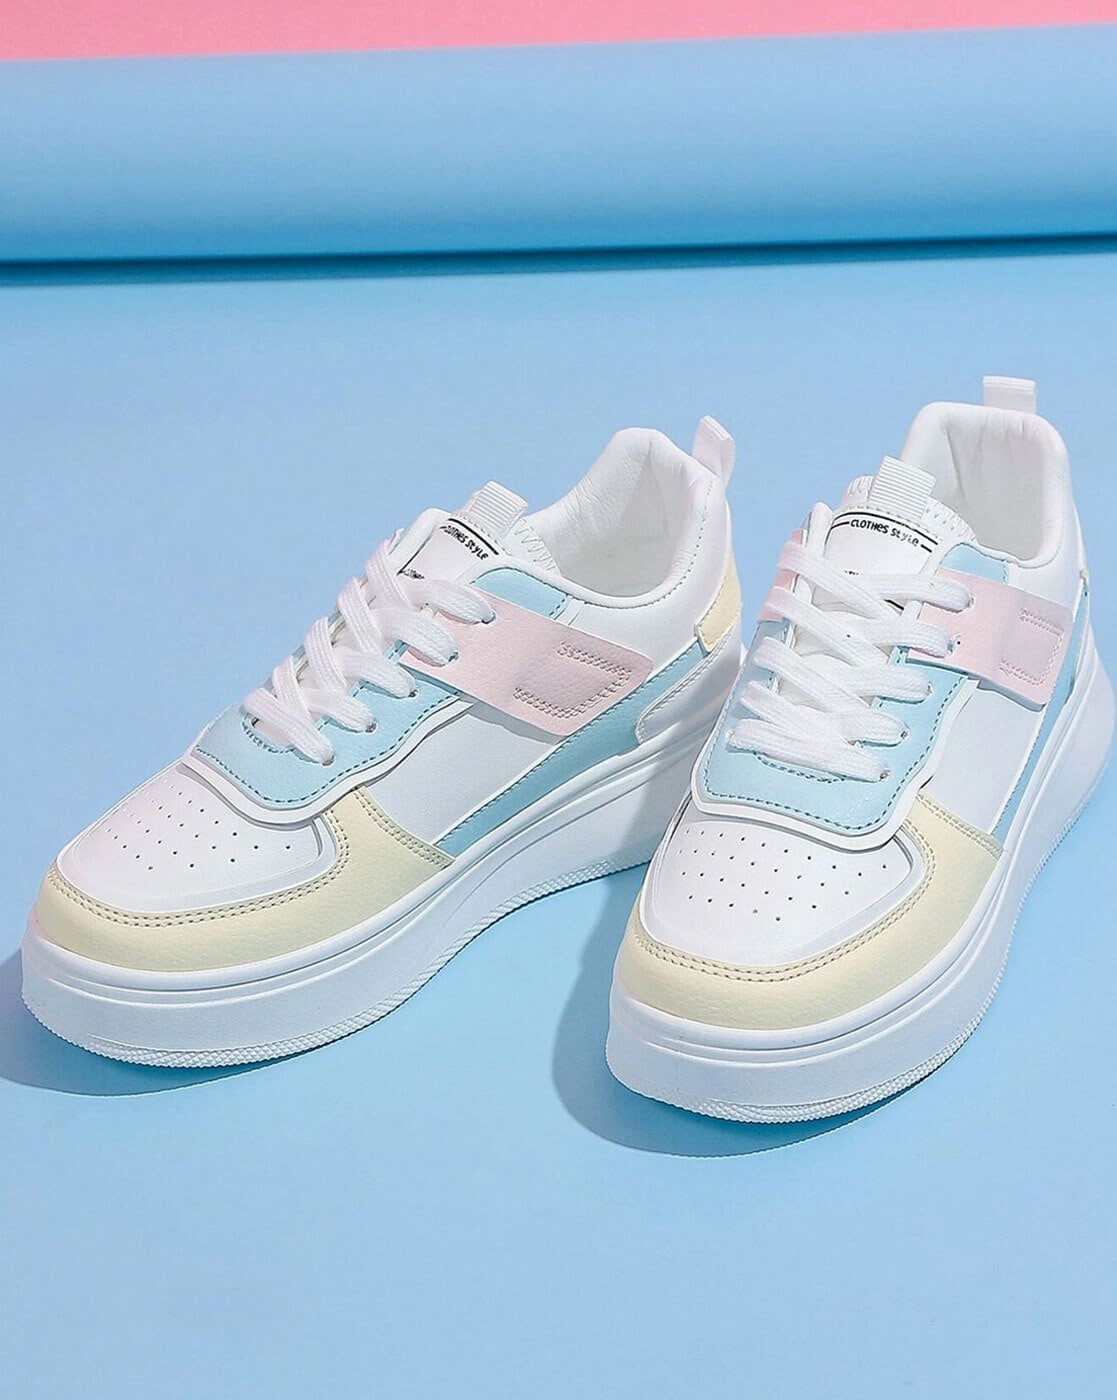 Reveal more than 180 white sneakers for girls best